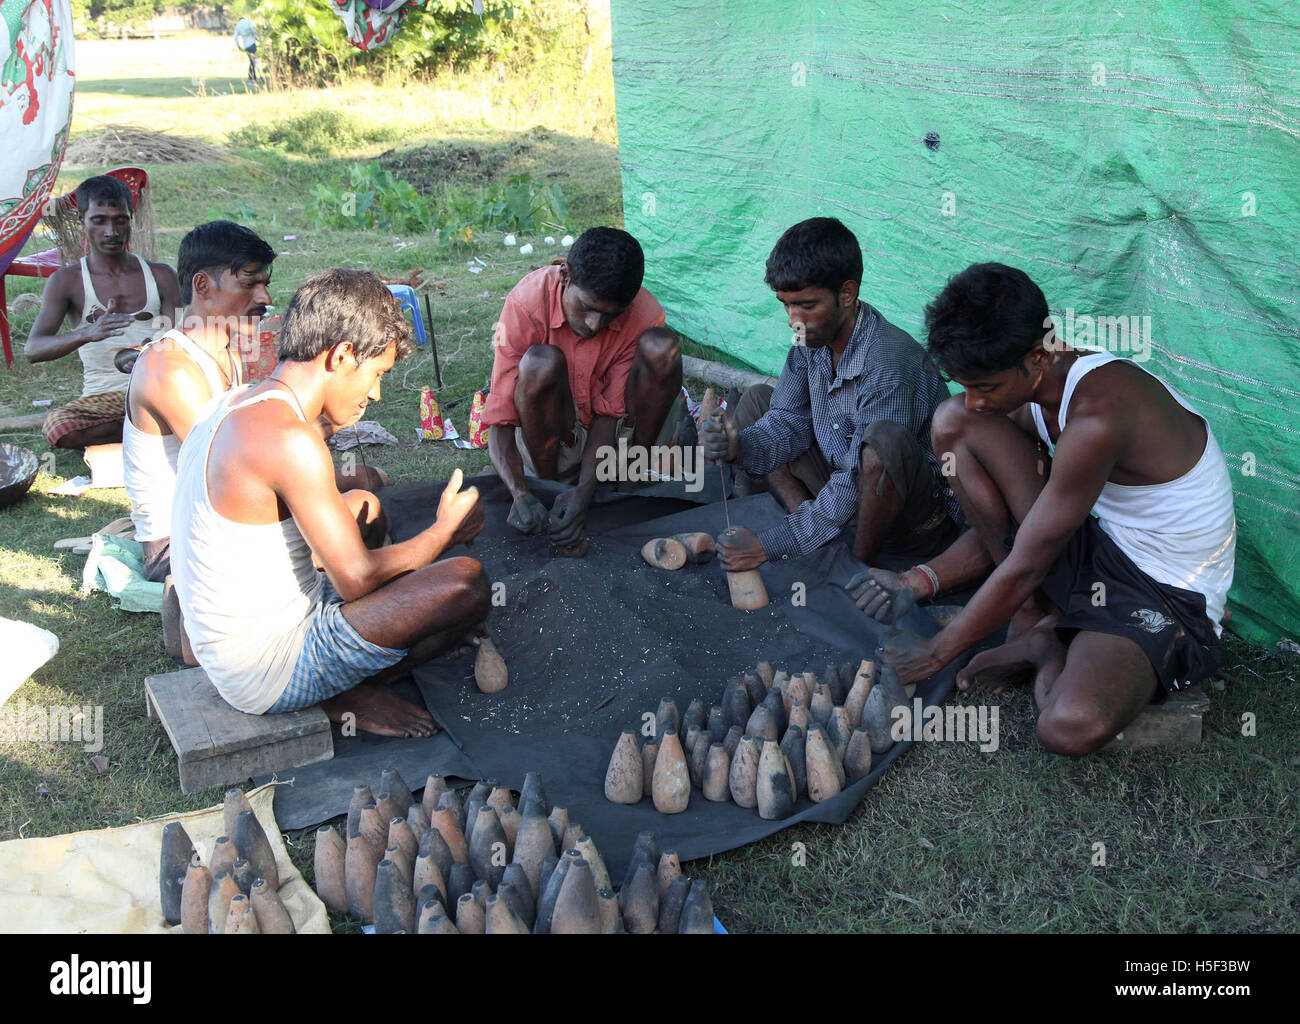 October 20, 2016 - Barpeta, Assam, India - Artisans making traditional  fire crackers ahead of Deepawali festival at Barpeta,Assam . The traditional fire cracker industry in Barpeta  was established in the year 1885 by late Laxmi Pathak  and it is still running successfully  (Credit Image: © Vikramjit Kakati via ZUMA Wire) Stock Photo